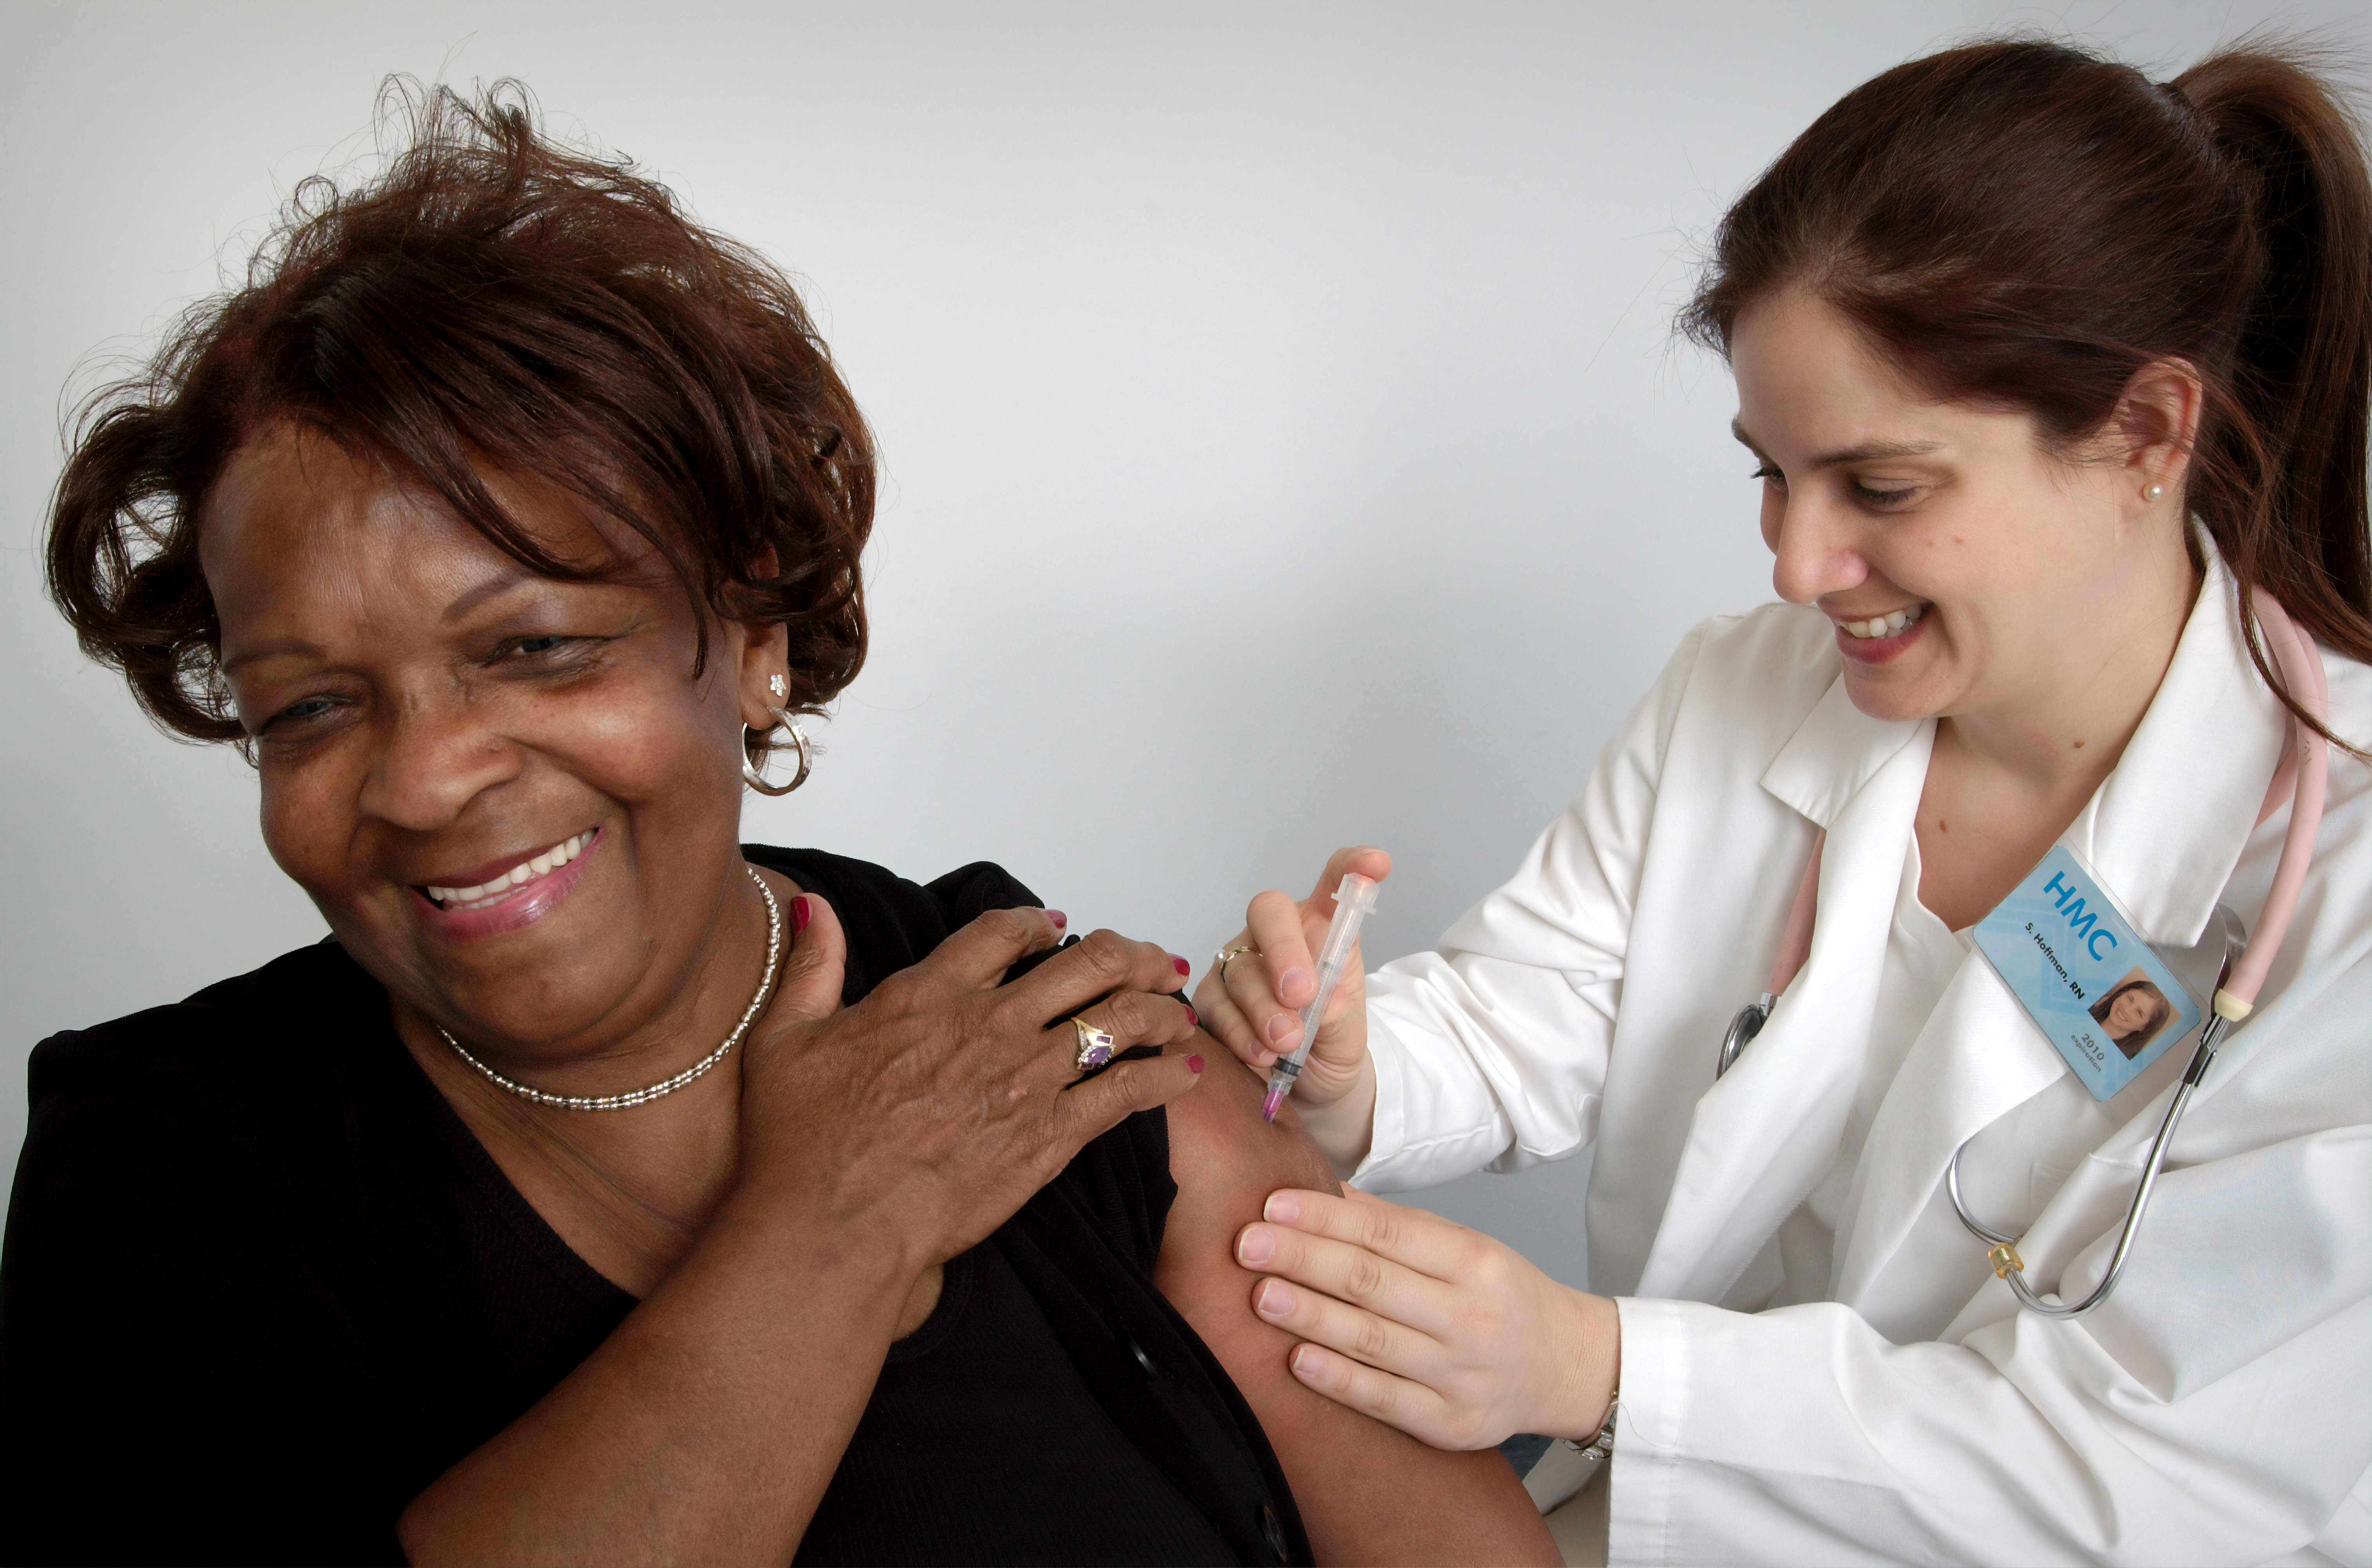 Depicted here, in this 2006 image was a middle-aged woman, who was in the process of receiving an intramuscular injection from a qualified nurse. The nurse had chosen the woman’s left shoulder muscle as the injection site, and was using her left hand to stabilize the area.